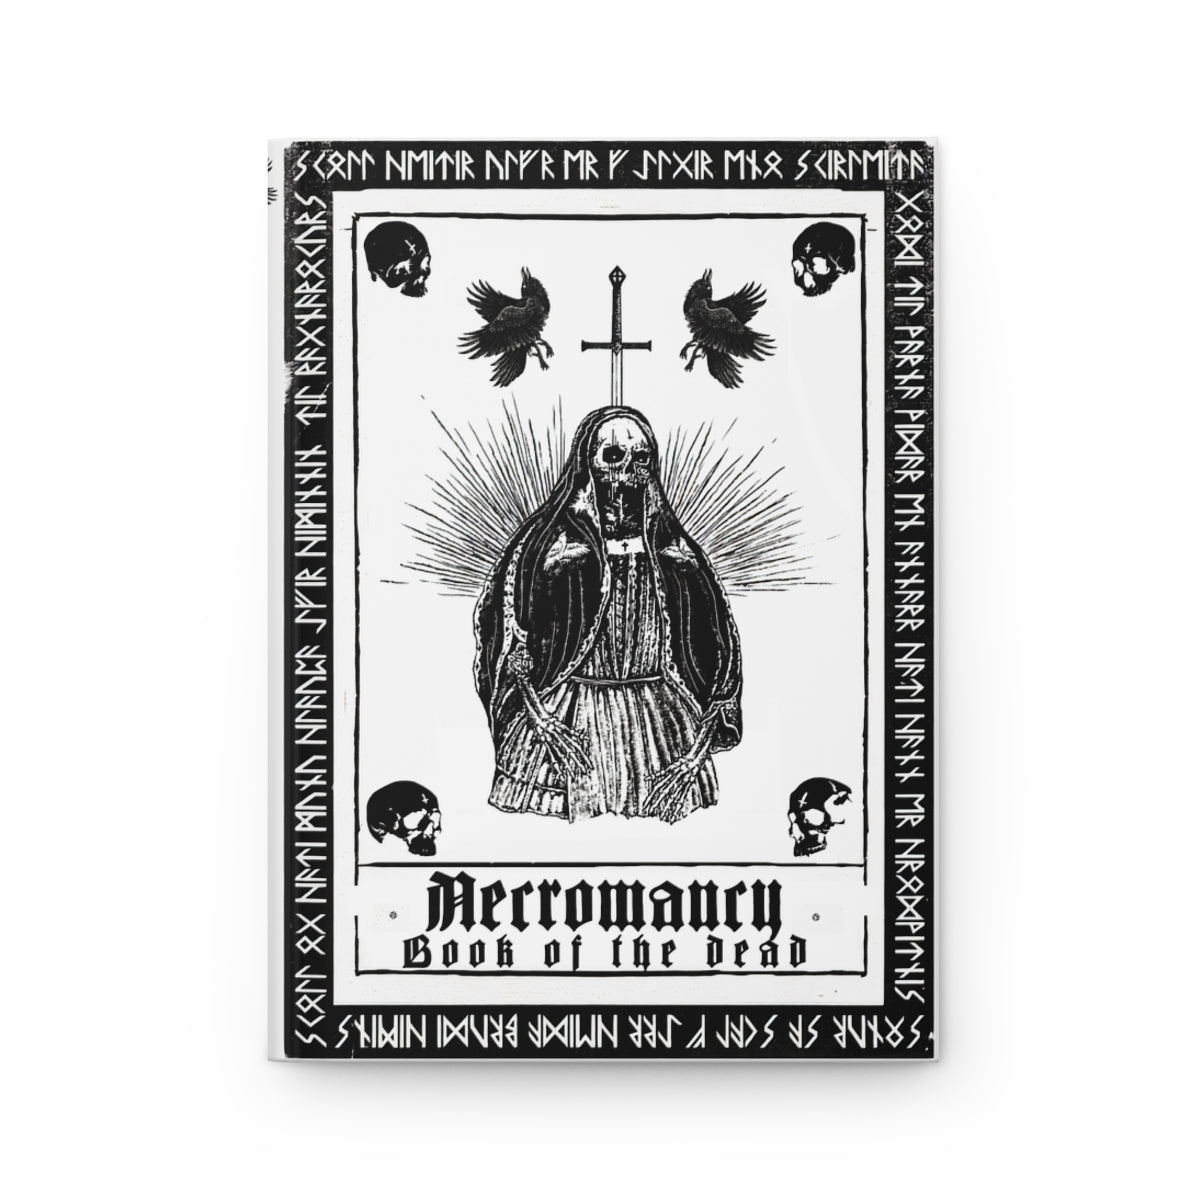 Necromancy - Book of the dead. Punishment. Hardcover Journal Matte. The shadow warlock. Lined journal. Artistic, story, Spell craft.